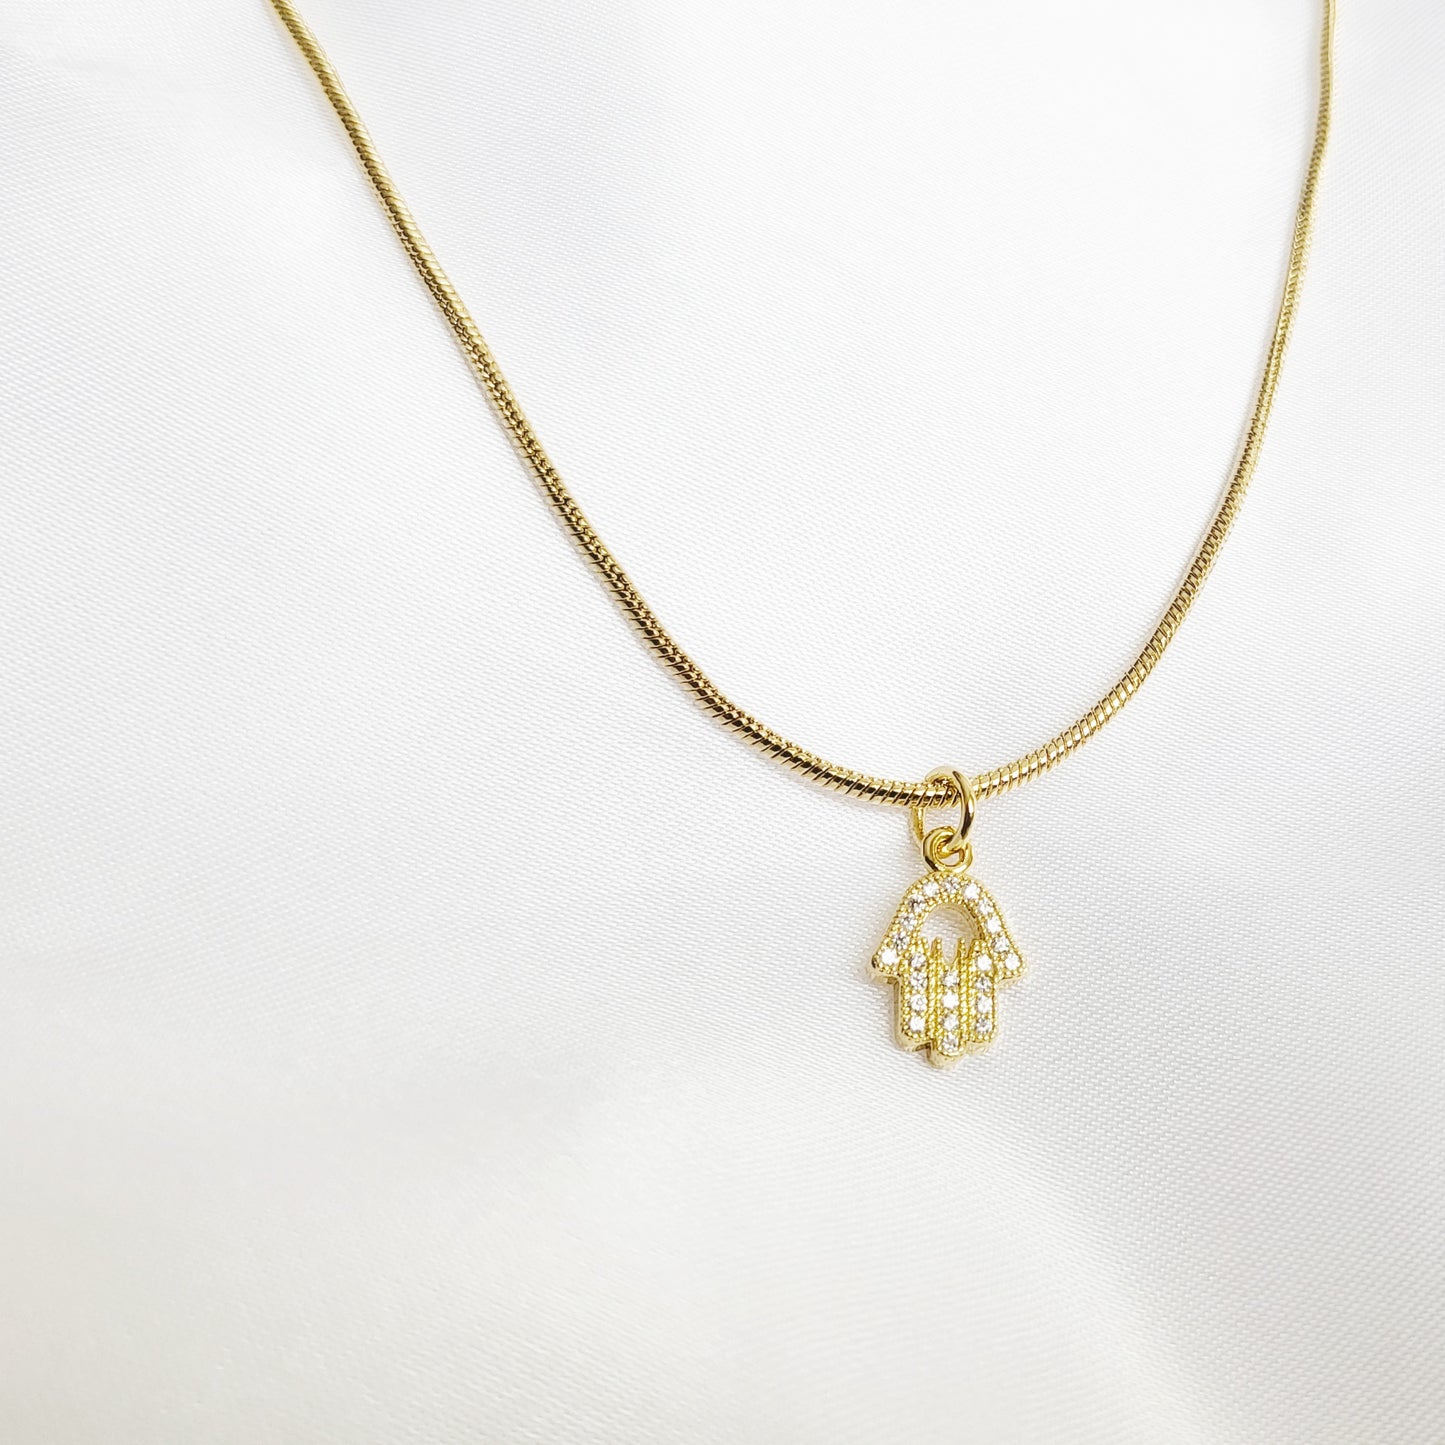 HAMSA | Hand of Hamsa Pendant | 18K Gold Snake Chain Necklace | Evil Eye Protection, Luck, and Blessings | Gift for Empaths | Fatima Necklace